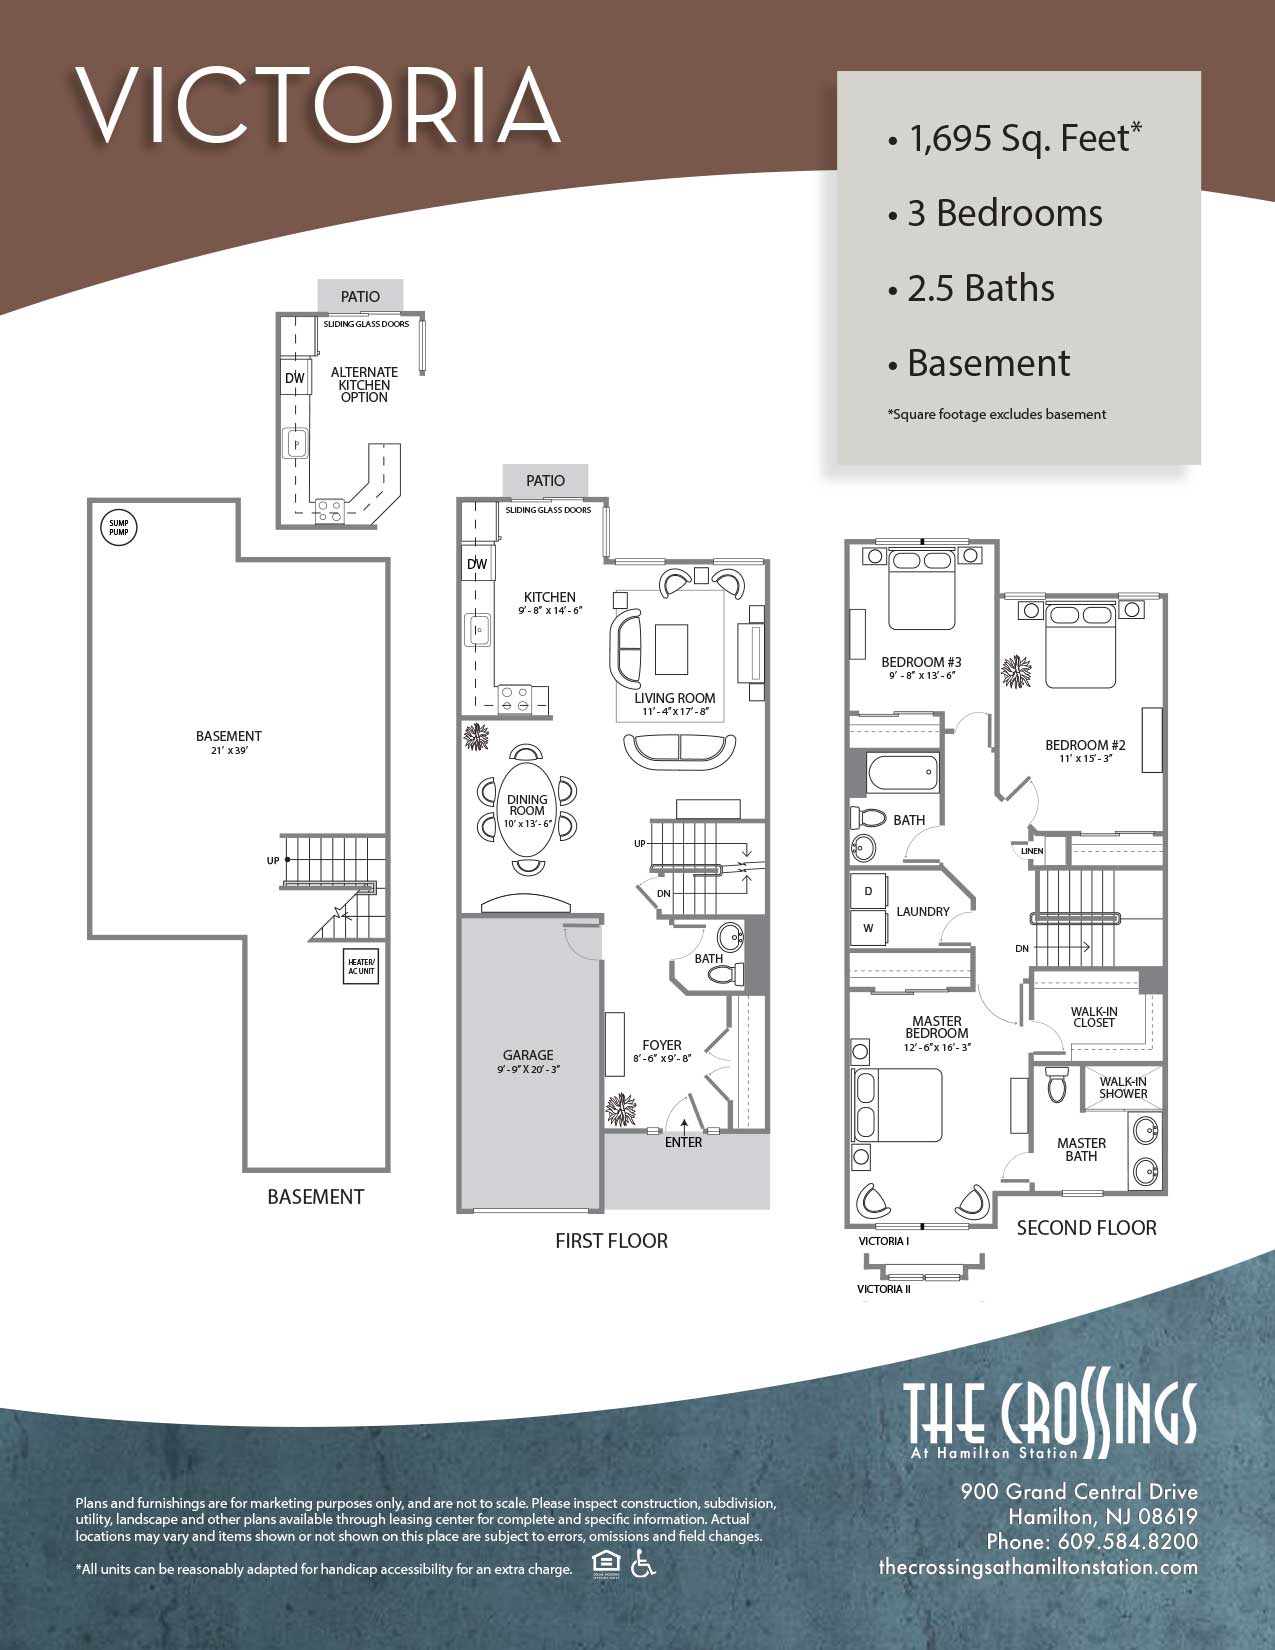 Luxurious Floor Plans The Crossings At Hamilton Station